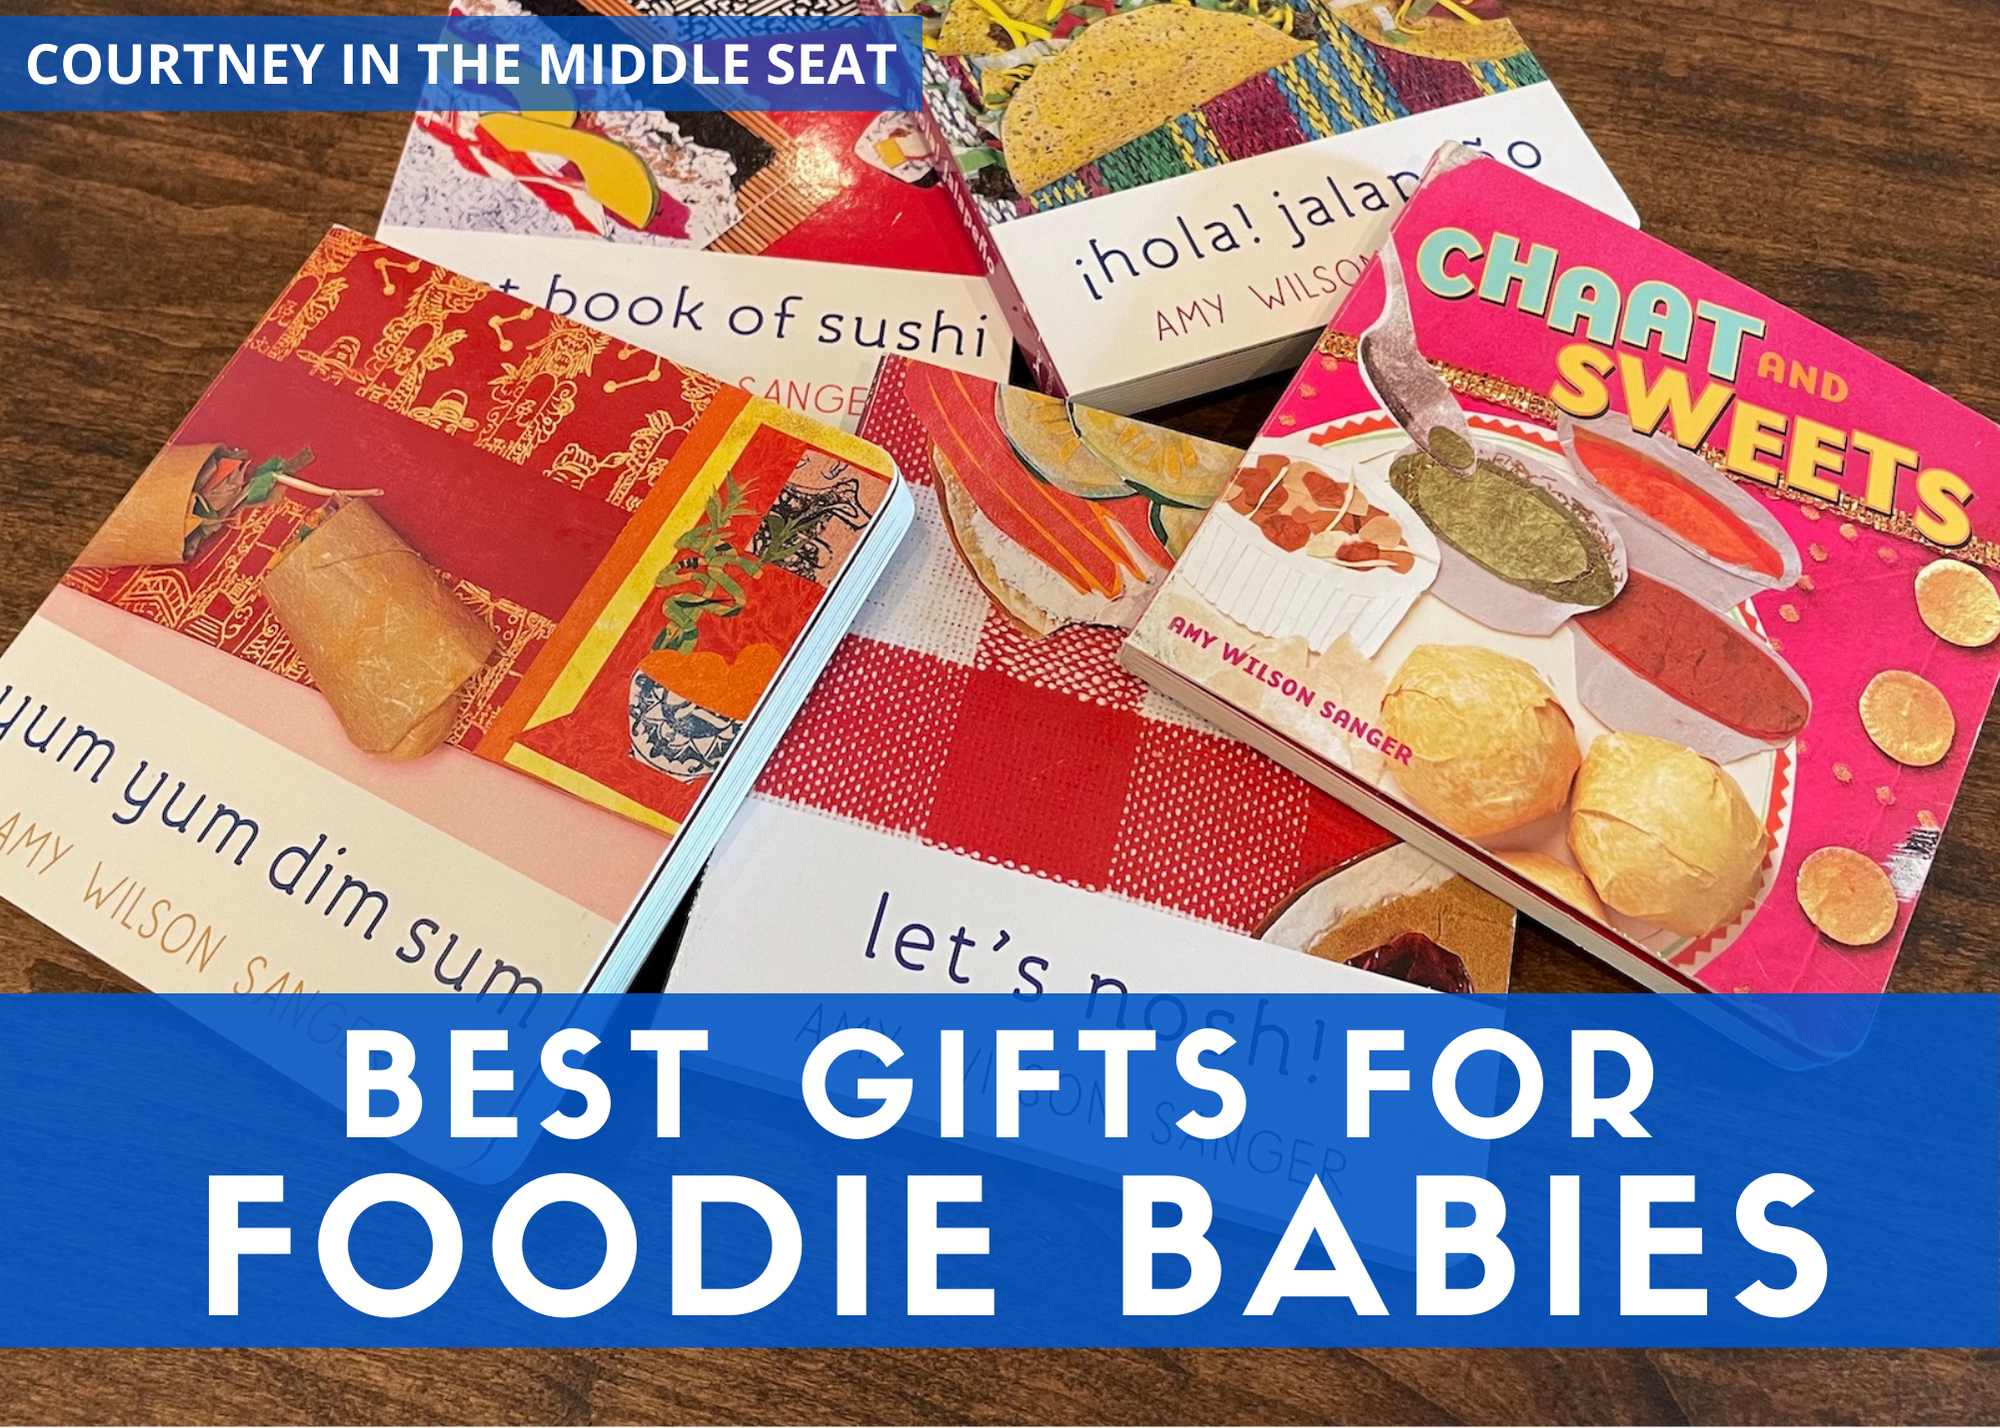 Gifts for Foodie Parents Cover Image with A World of Snacks Books